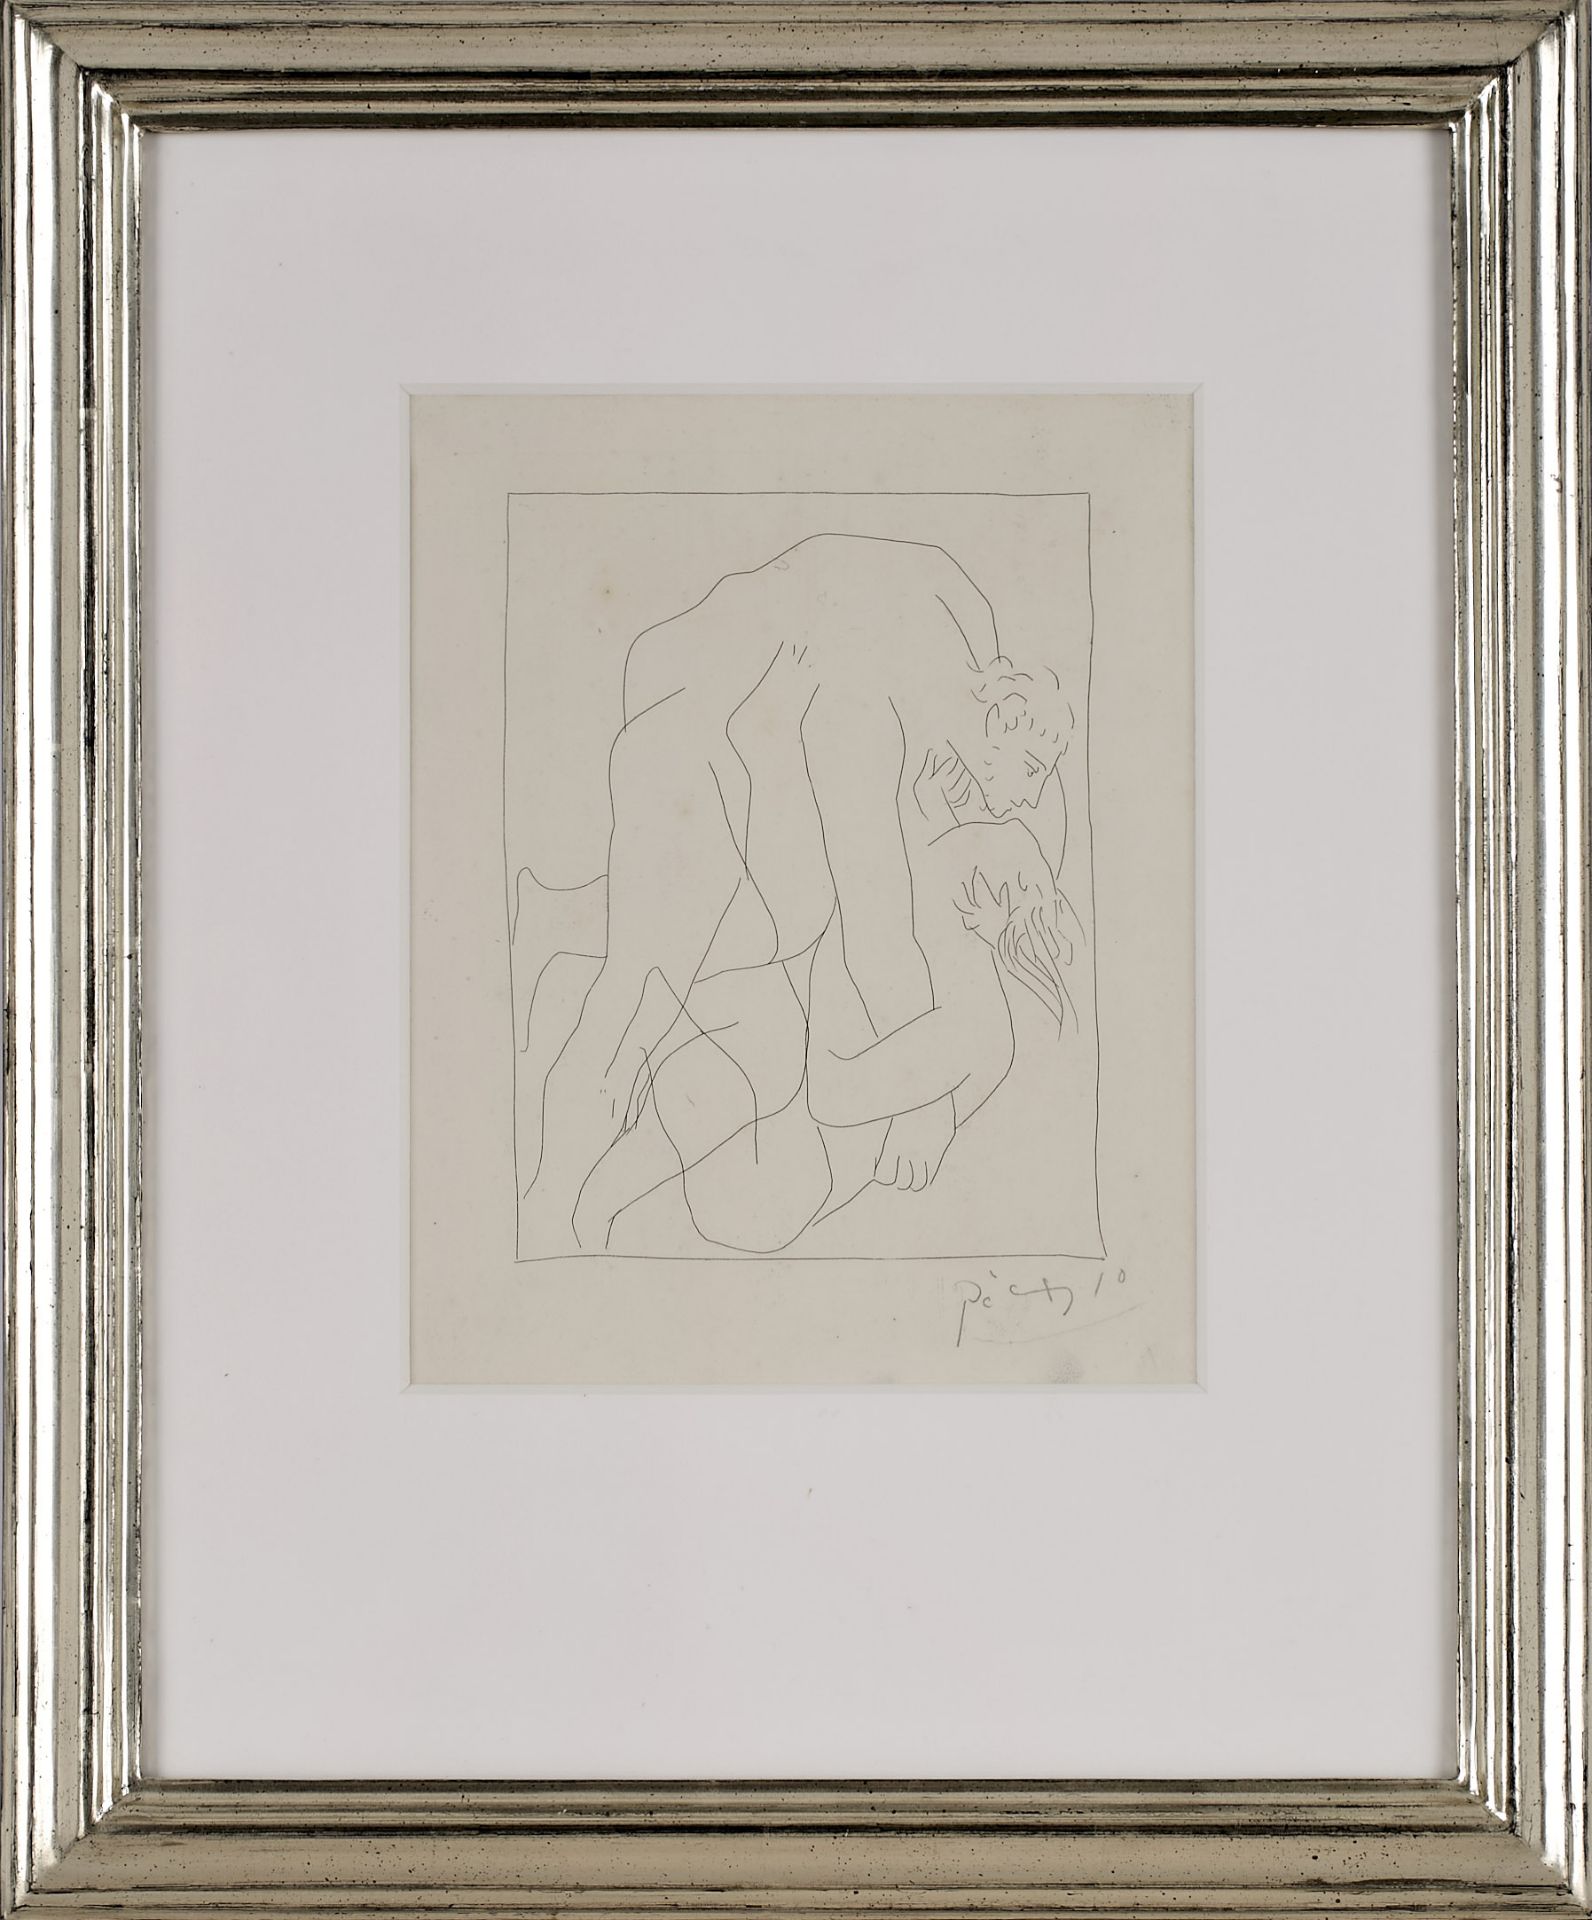 Picasso, Pablo - Image 2 of 2